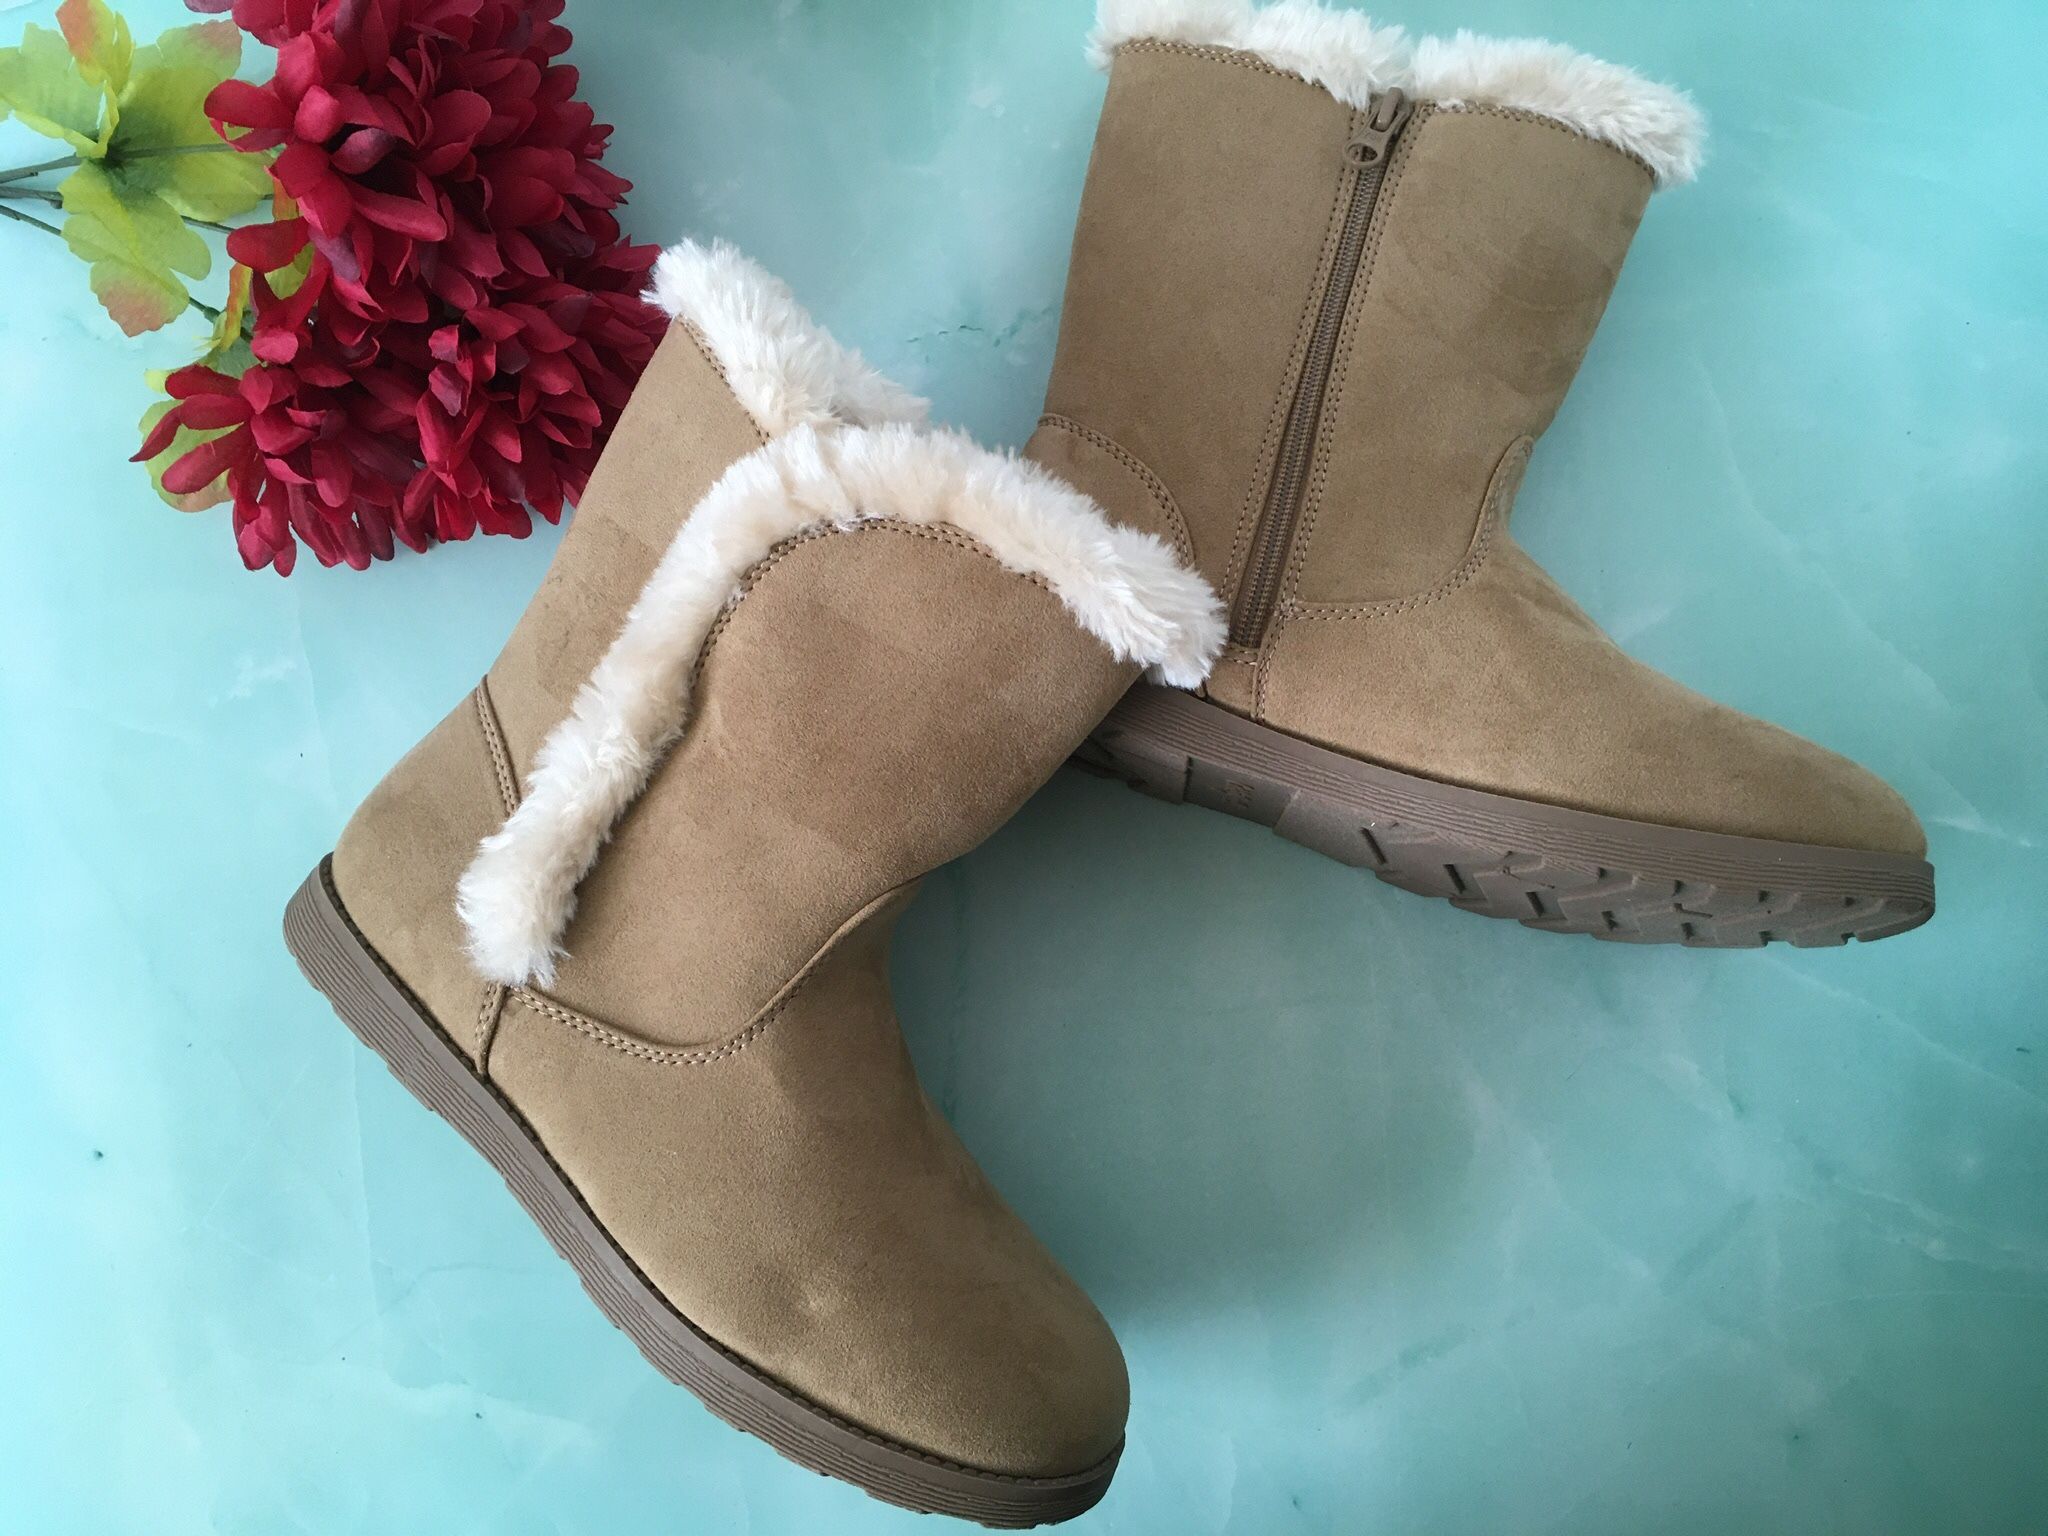 Tan Winter Boots, Size 6